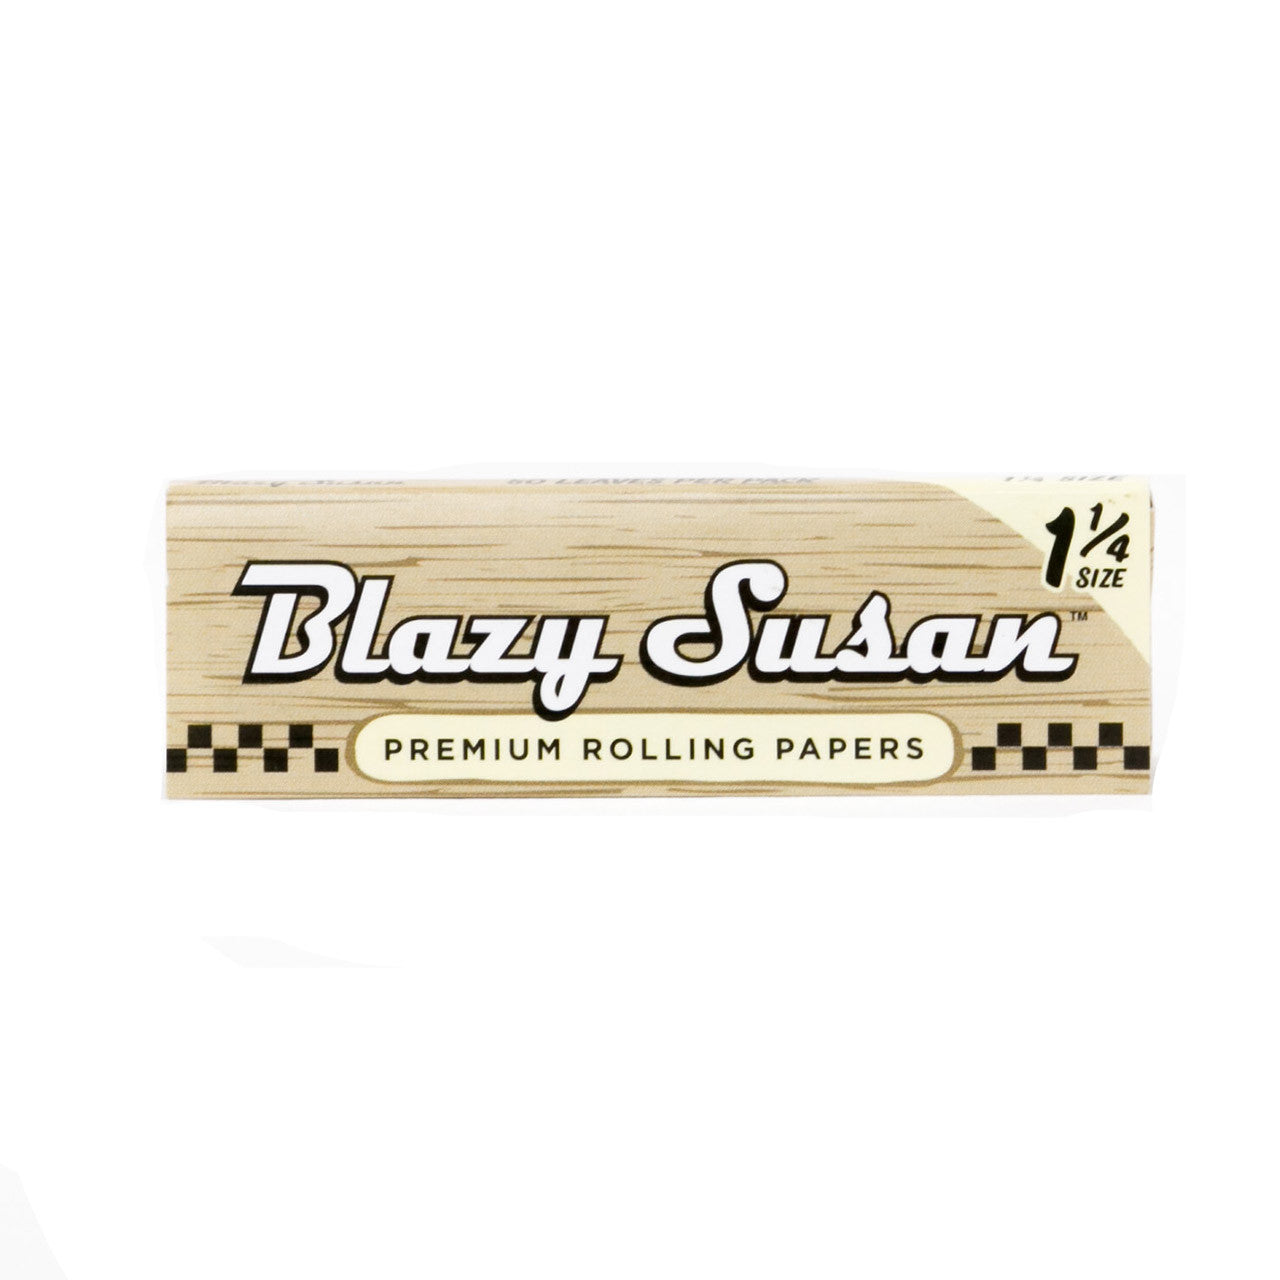 Blazy Susan Unbleached 1¼ Rolling Papers (50ct)